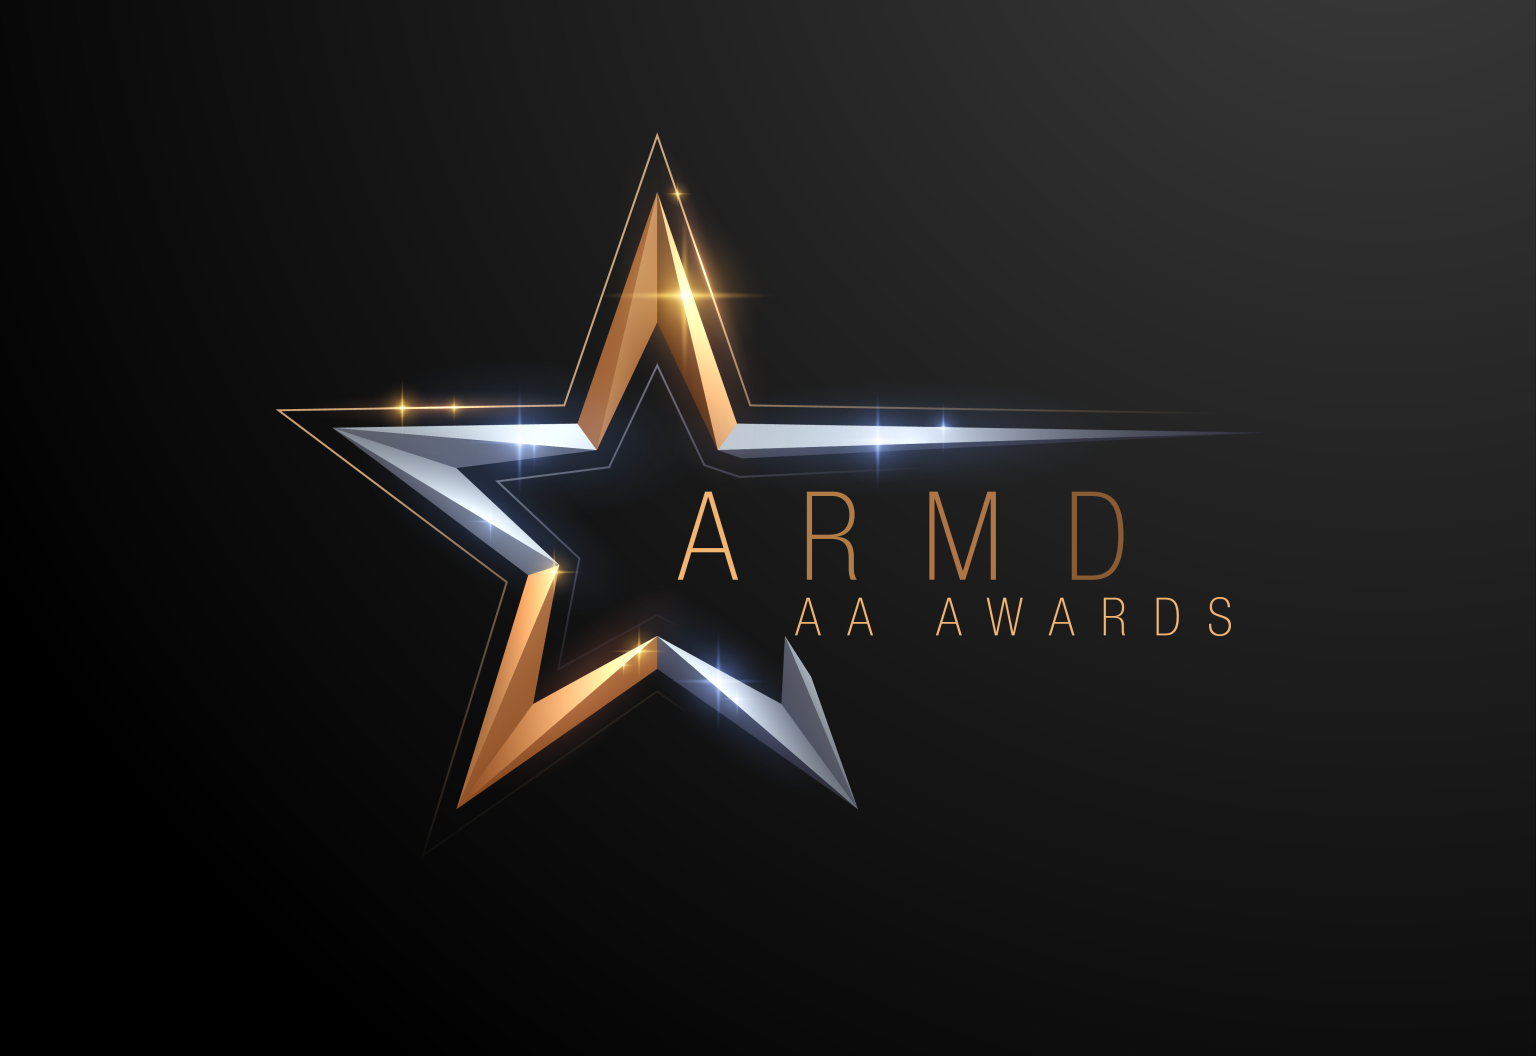 ARMD Awards, gold and silver star on a dark background with the words ARMD AA Awards